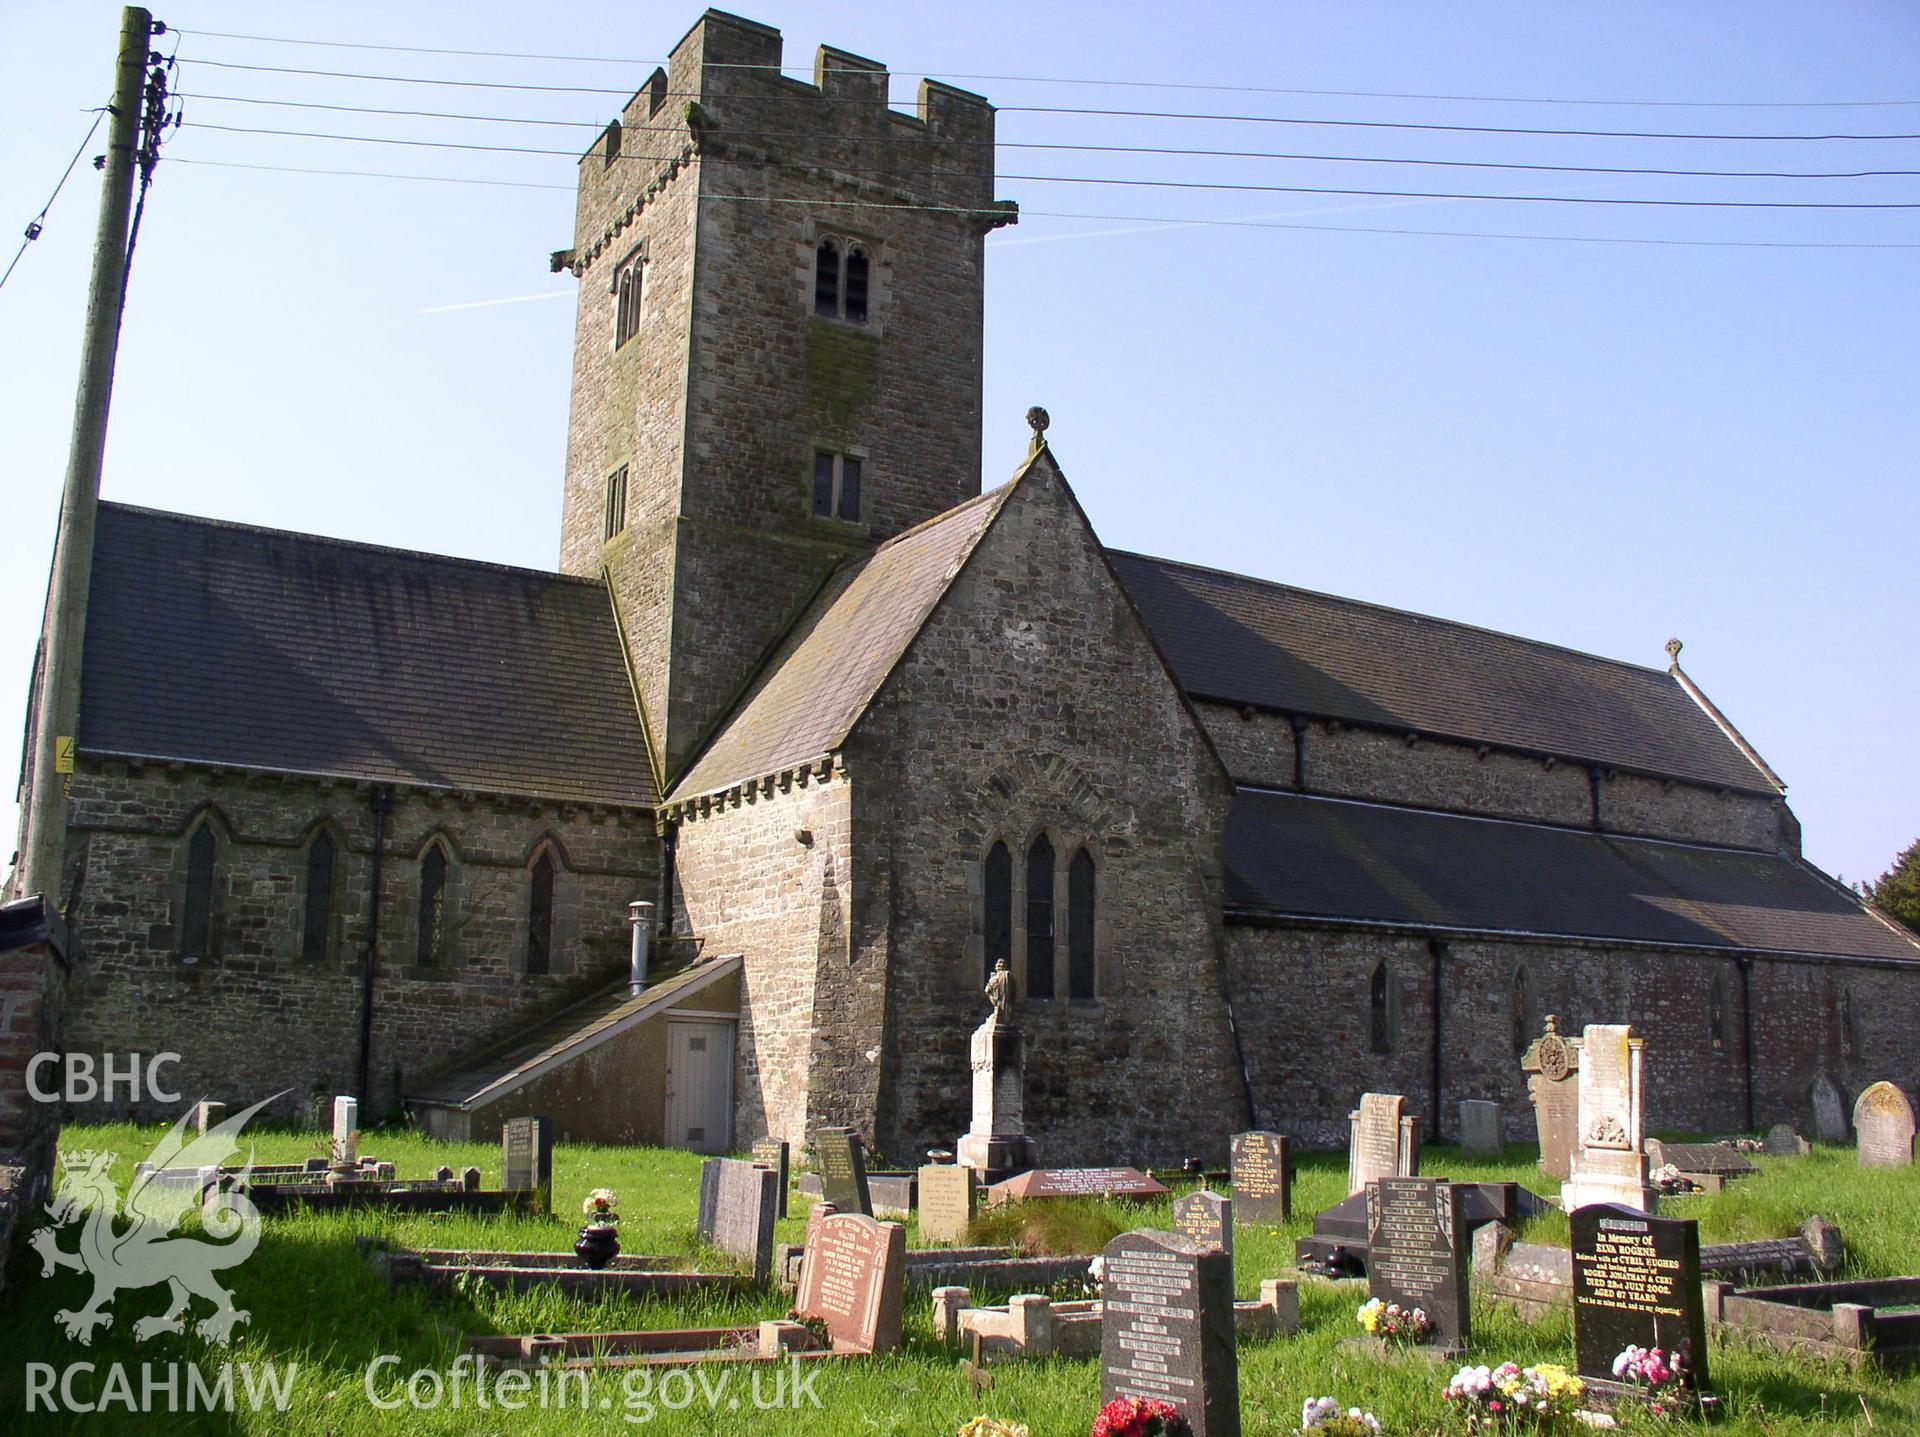 Colour digital photograph showing the exterior of St. Crallo's Church, Coychurch.